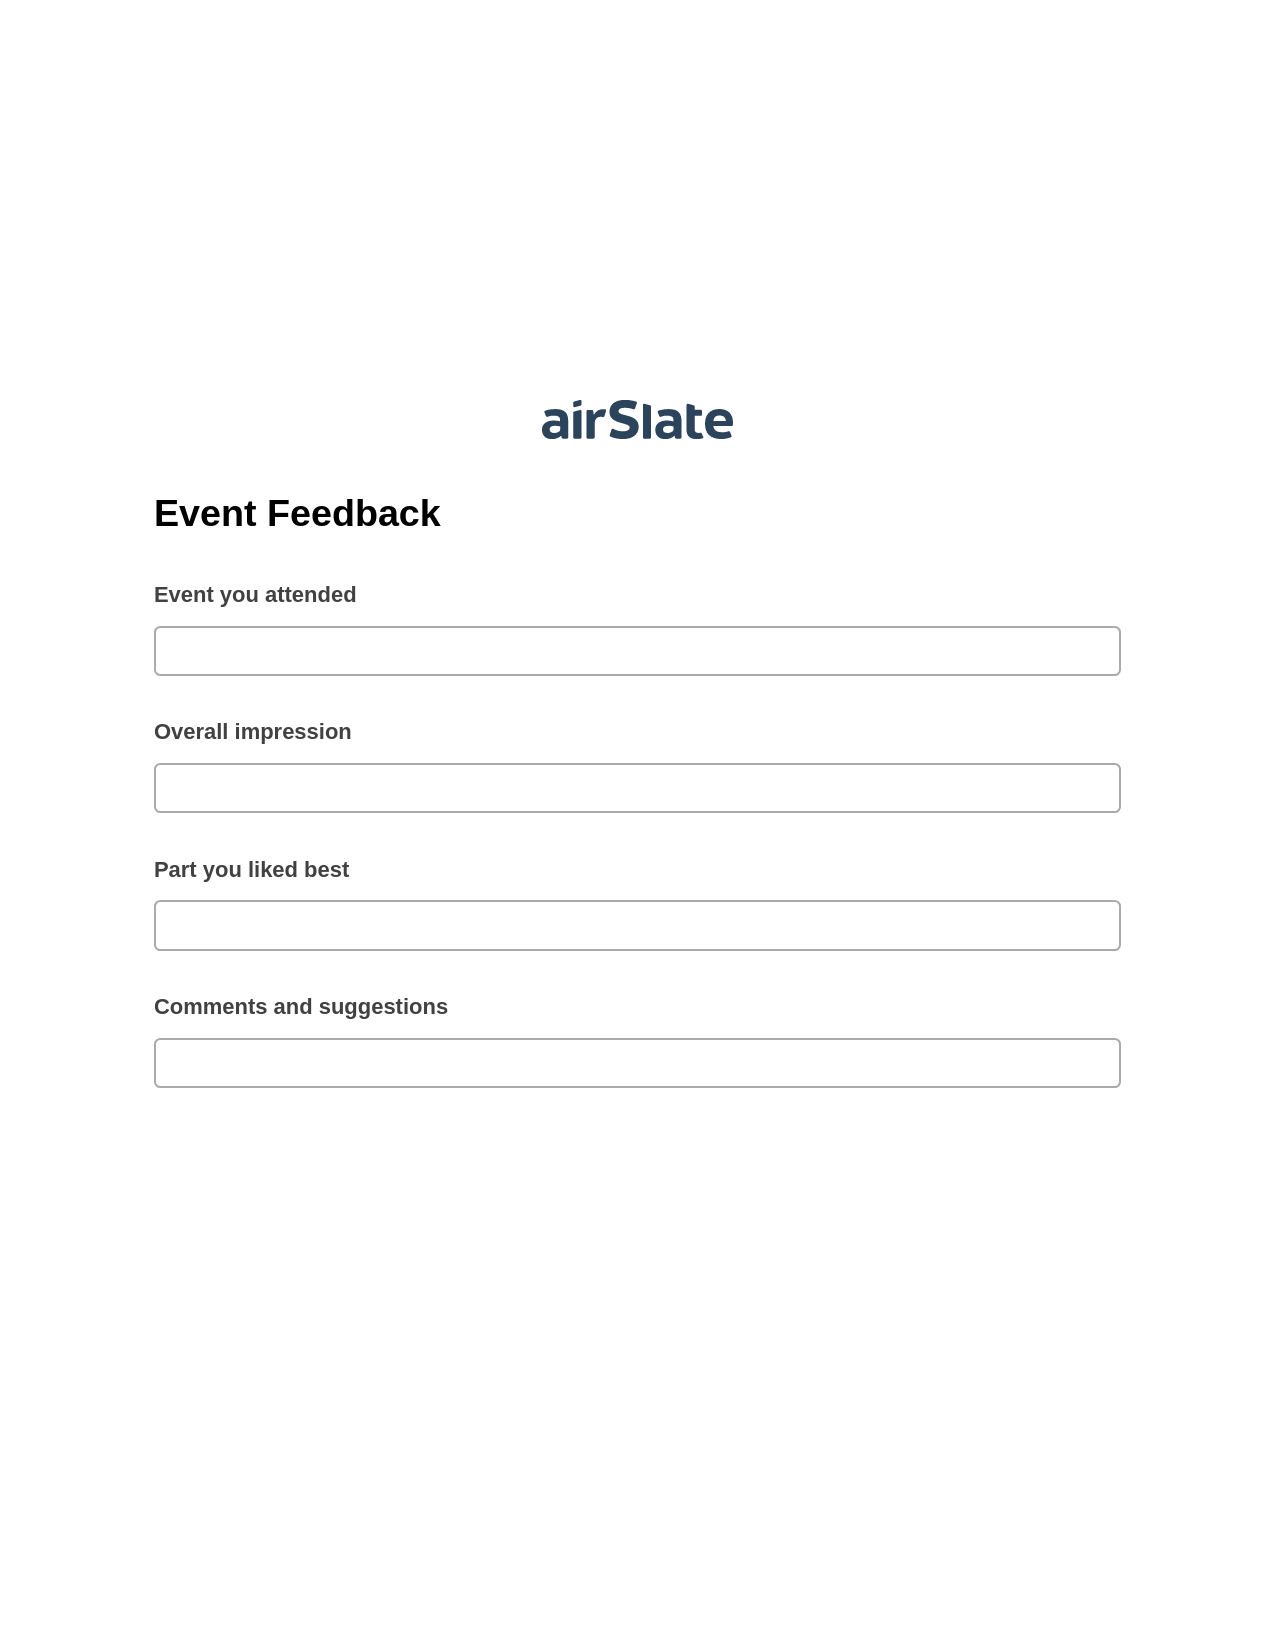 Event Feedback Pre-fill Dropdown from Airtable, Open as Role Bot, Export to NetSuite Record Bot